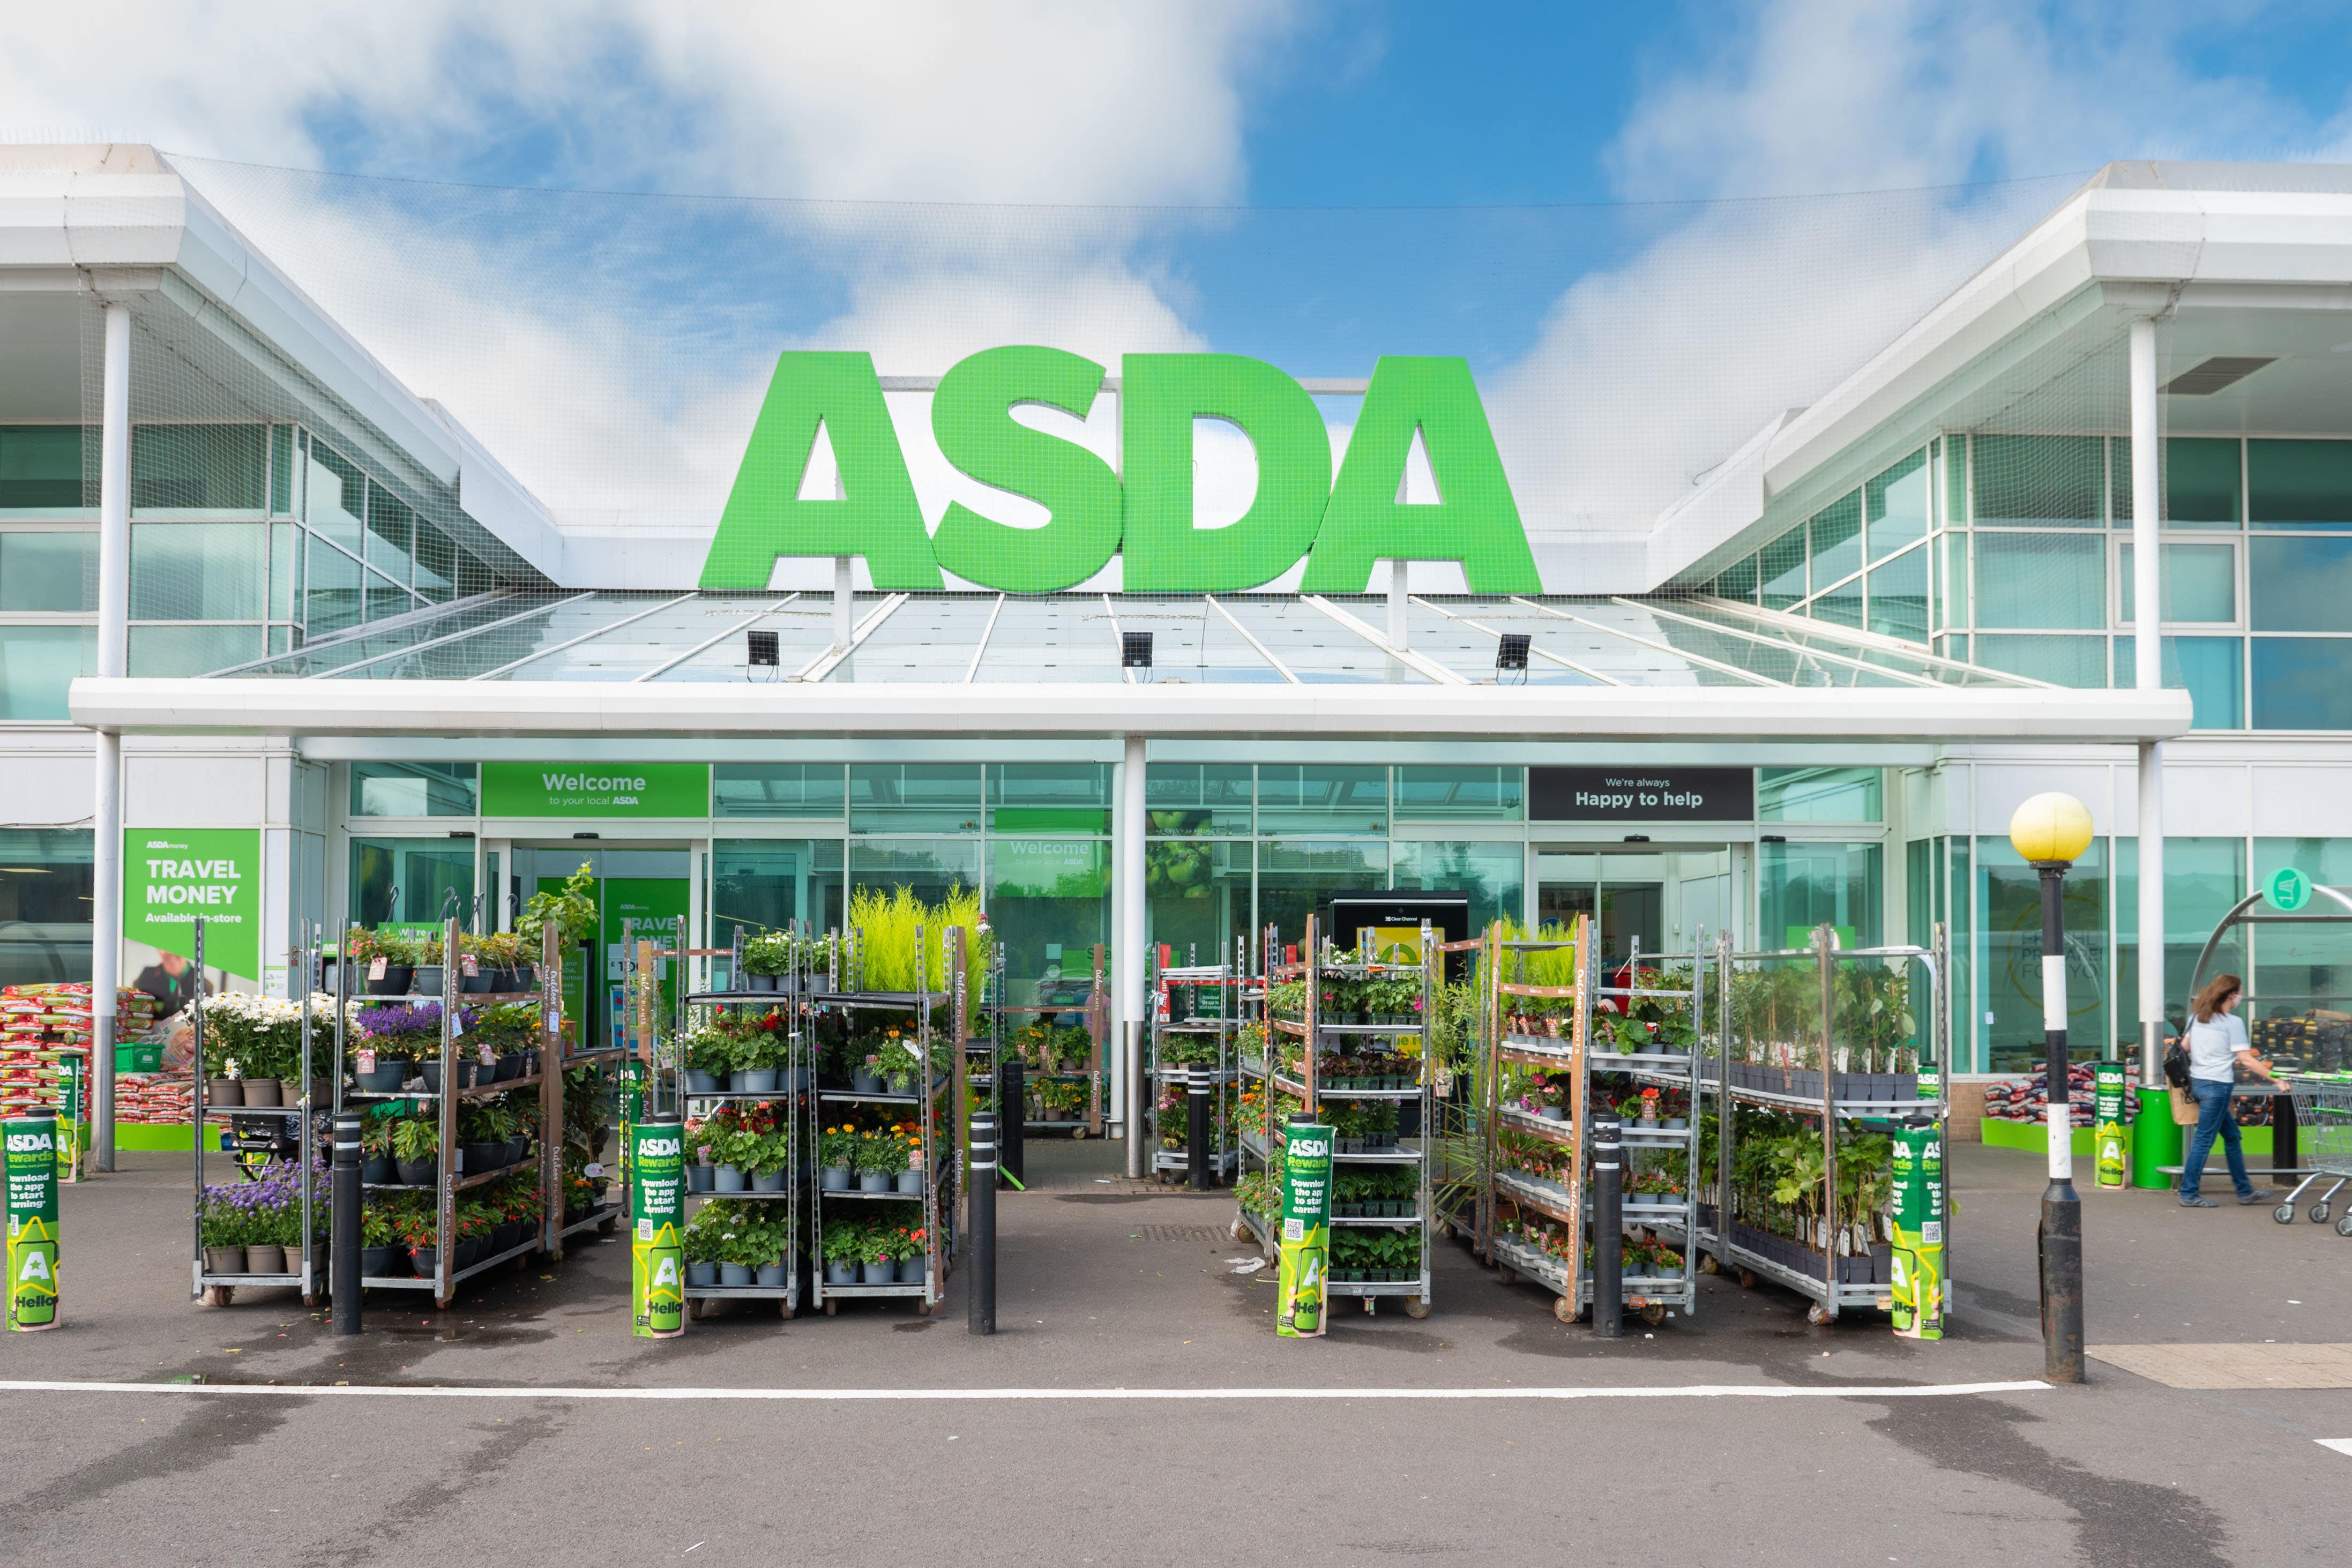 Asda buys petrol empire from its owners for £2.3 billion | The Independent